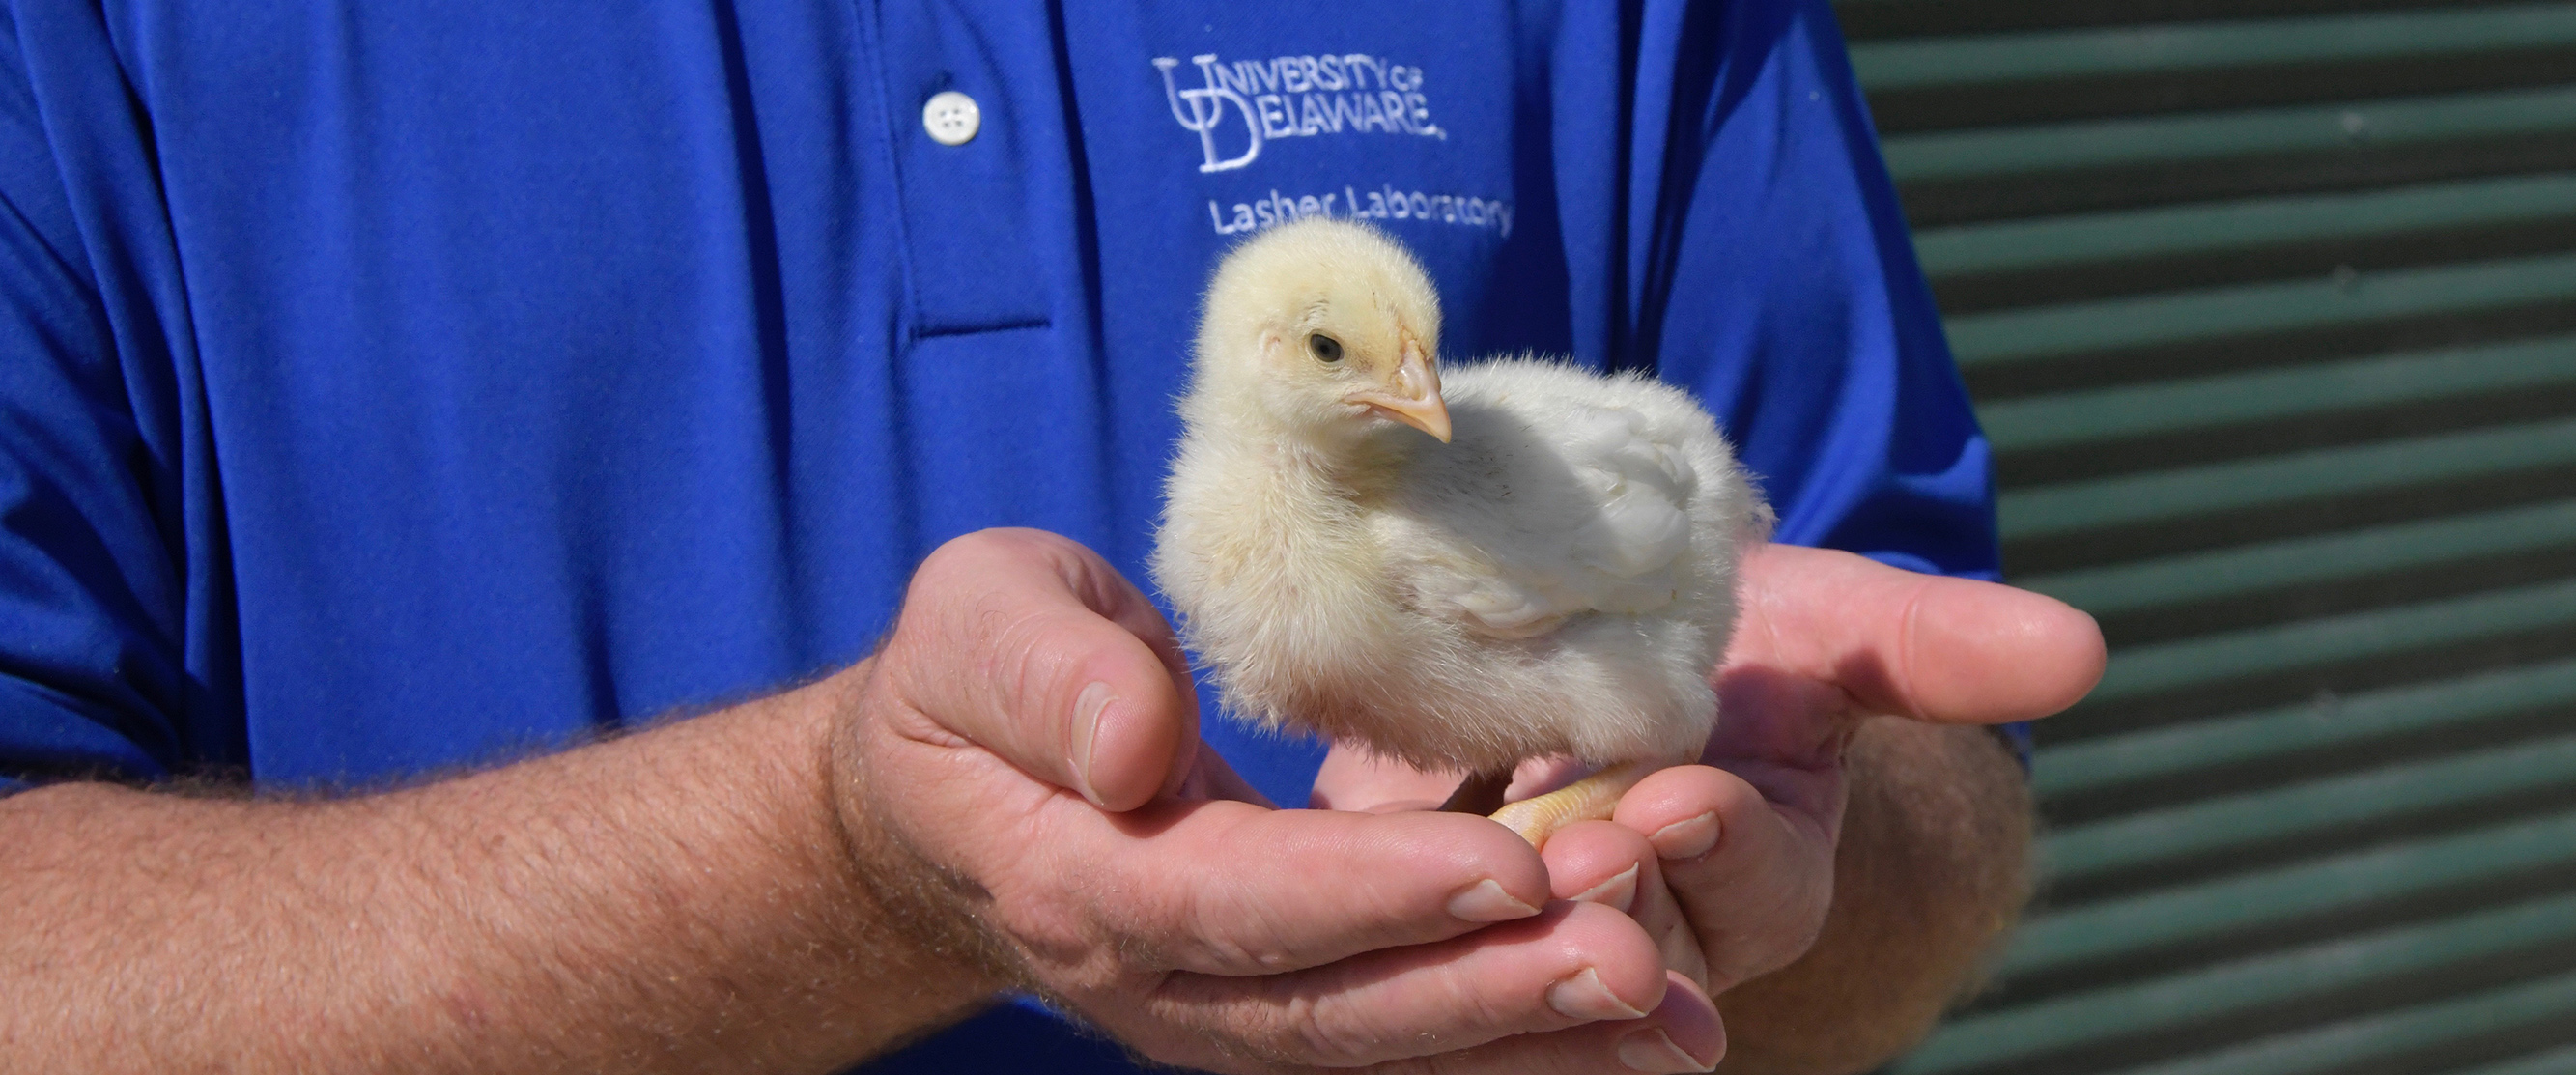 Researchers in Lasher Lab work on diagnostic services of the Poultry Health System